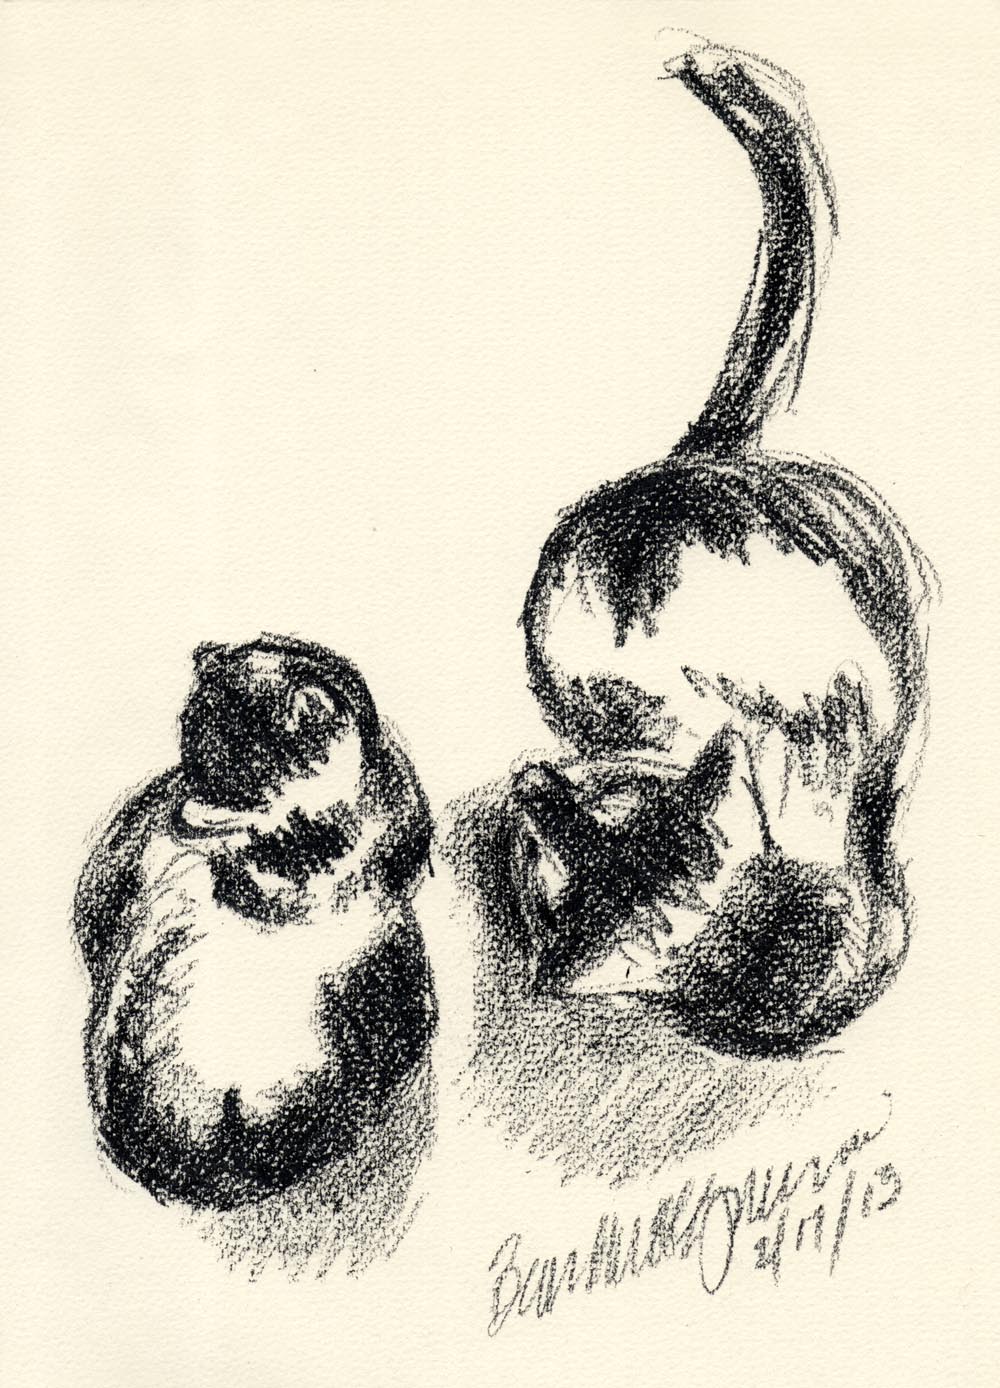 charcoal sketch of two cats on cream colored paper